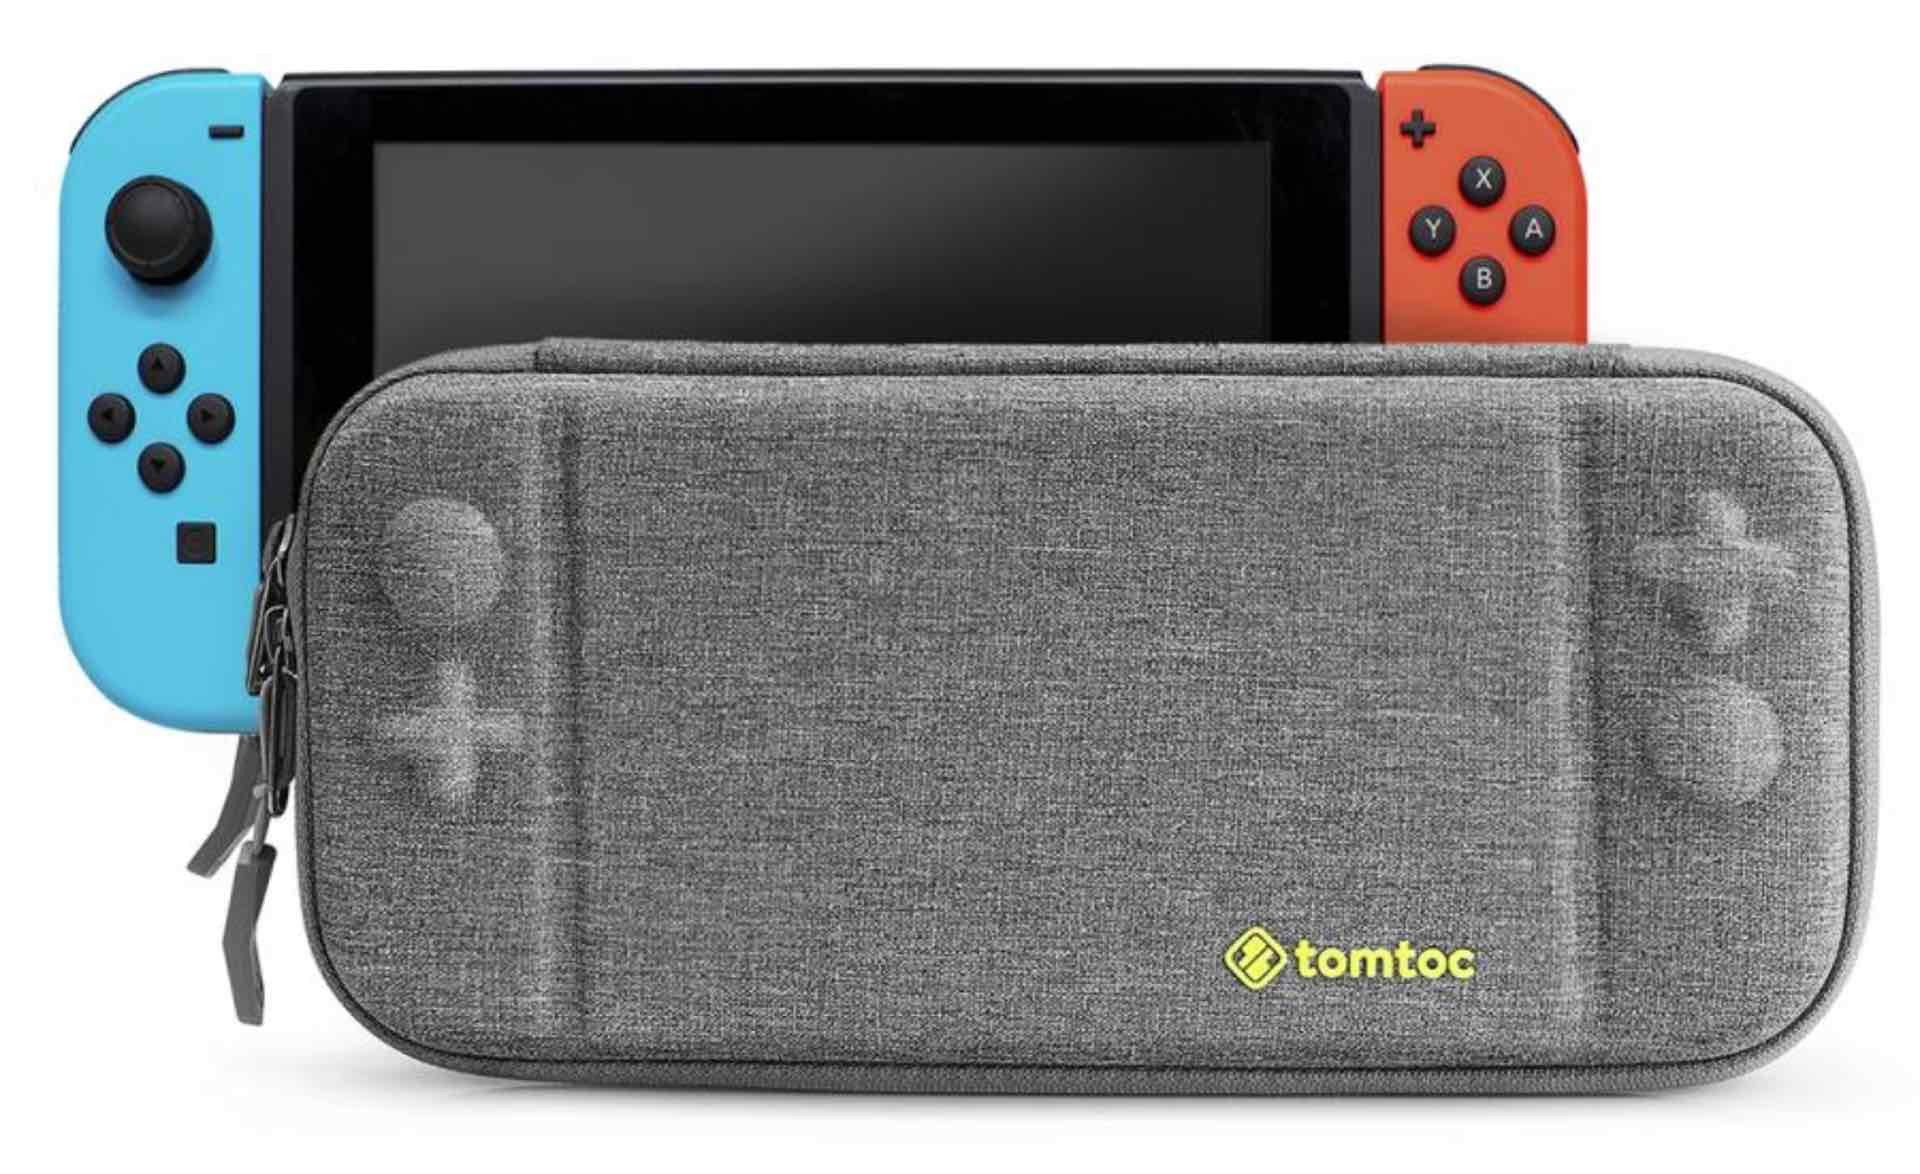 Tomtoc ultra-slim case for Nintendo Switch. ($17)